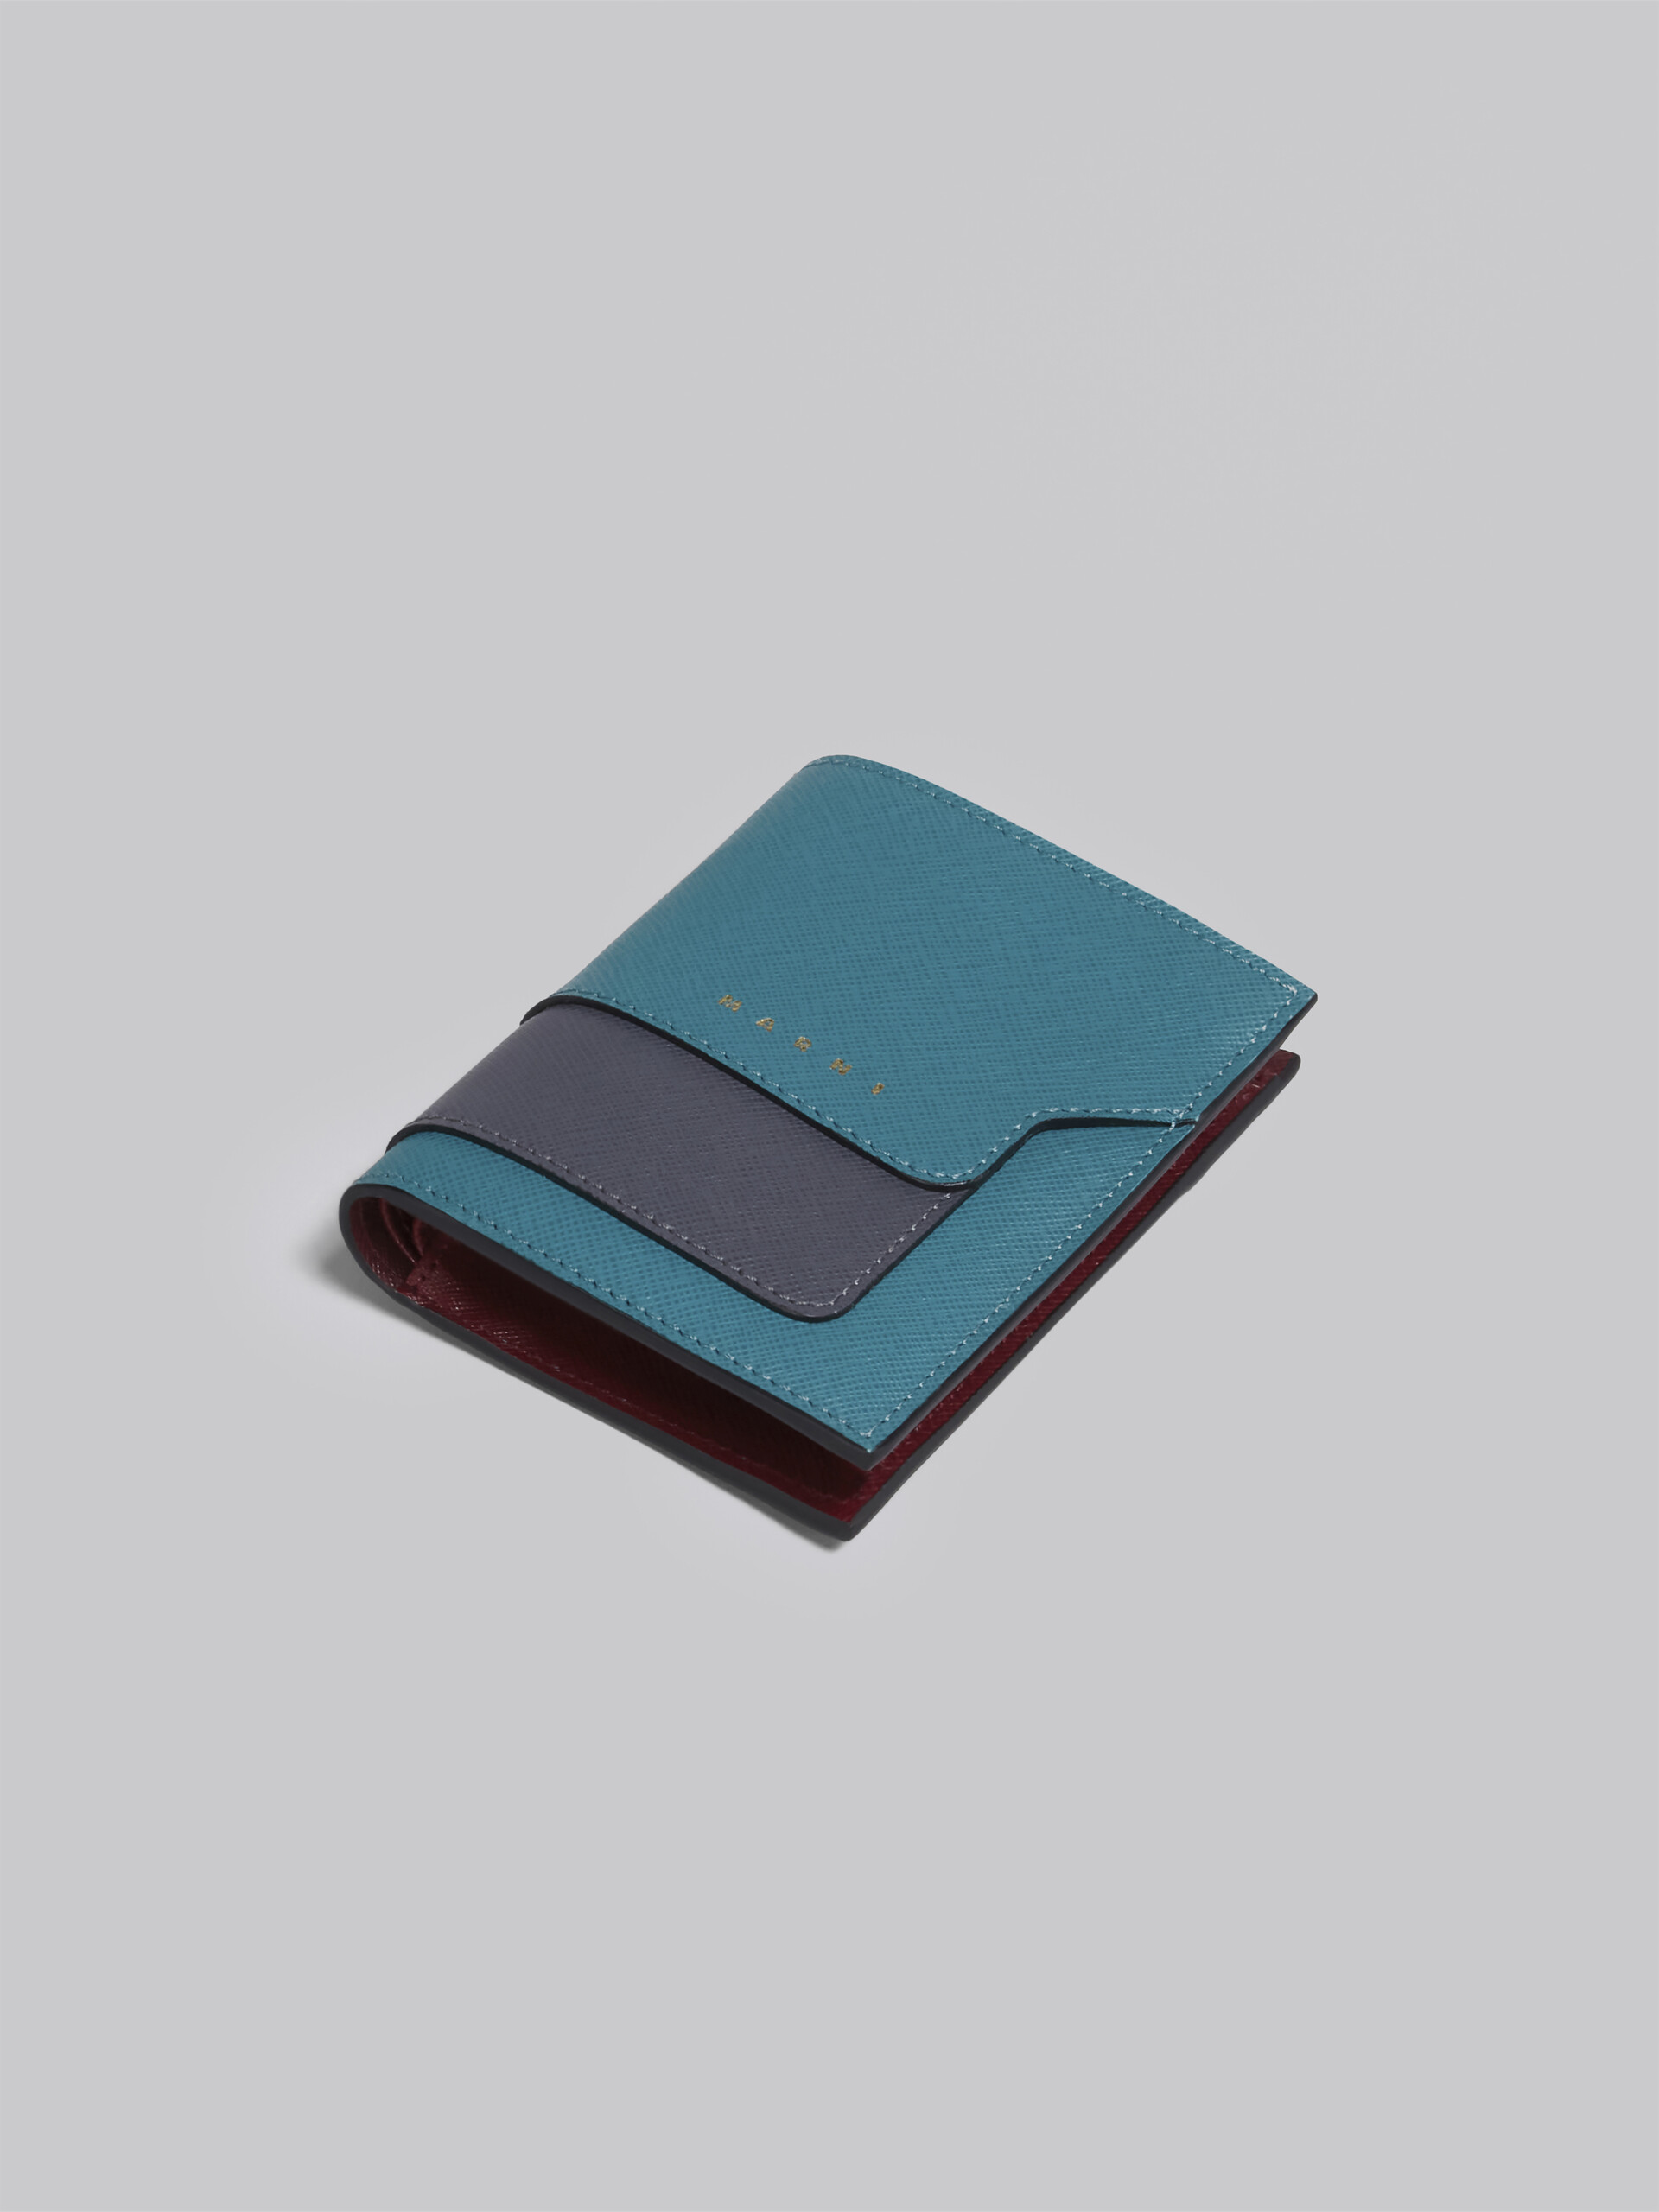 Blue grey and red saffiano leather bi-fold wallet - Wallets - Image 5